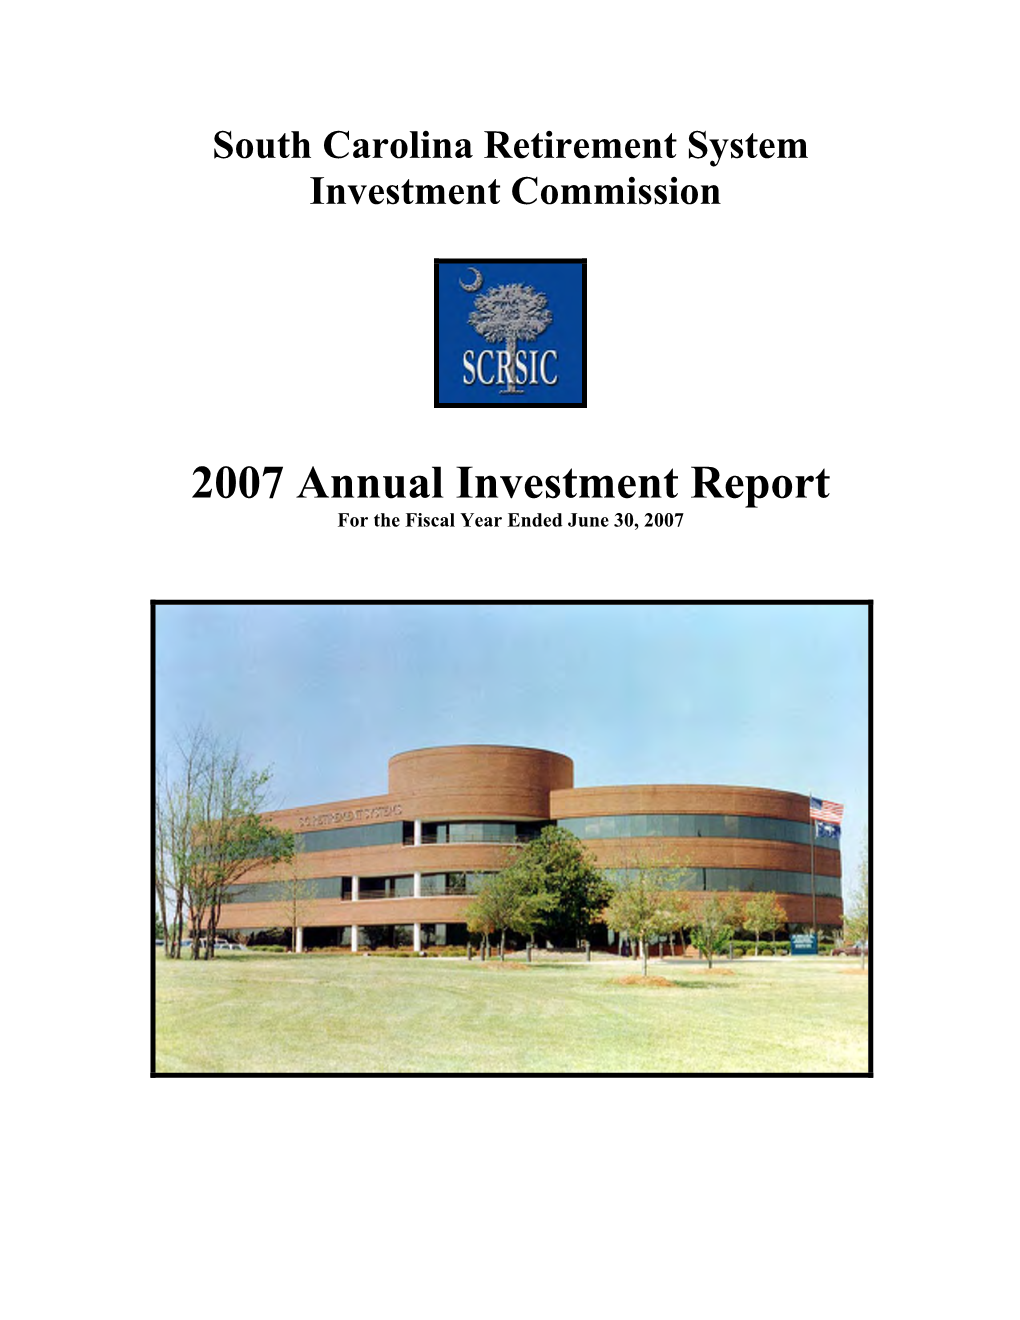 2007 Annual Investment Report for the Fiscal Year Ended June 30, 2007